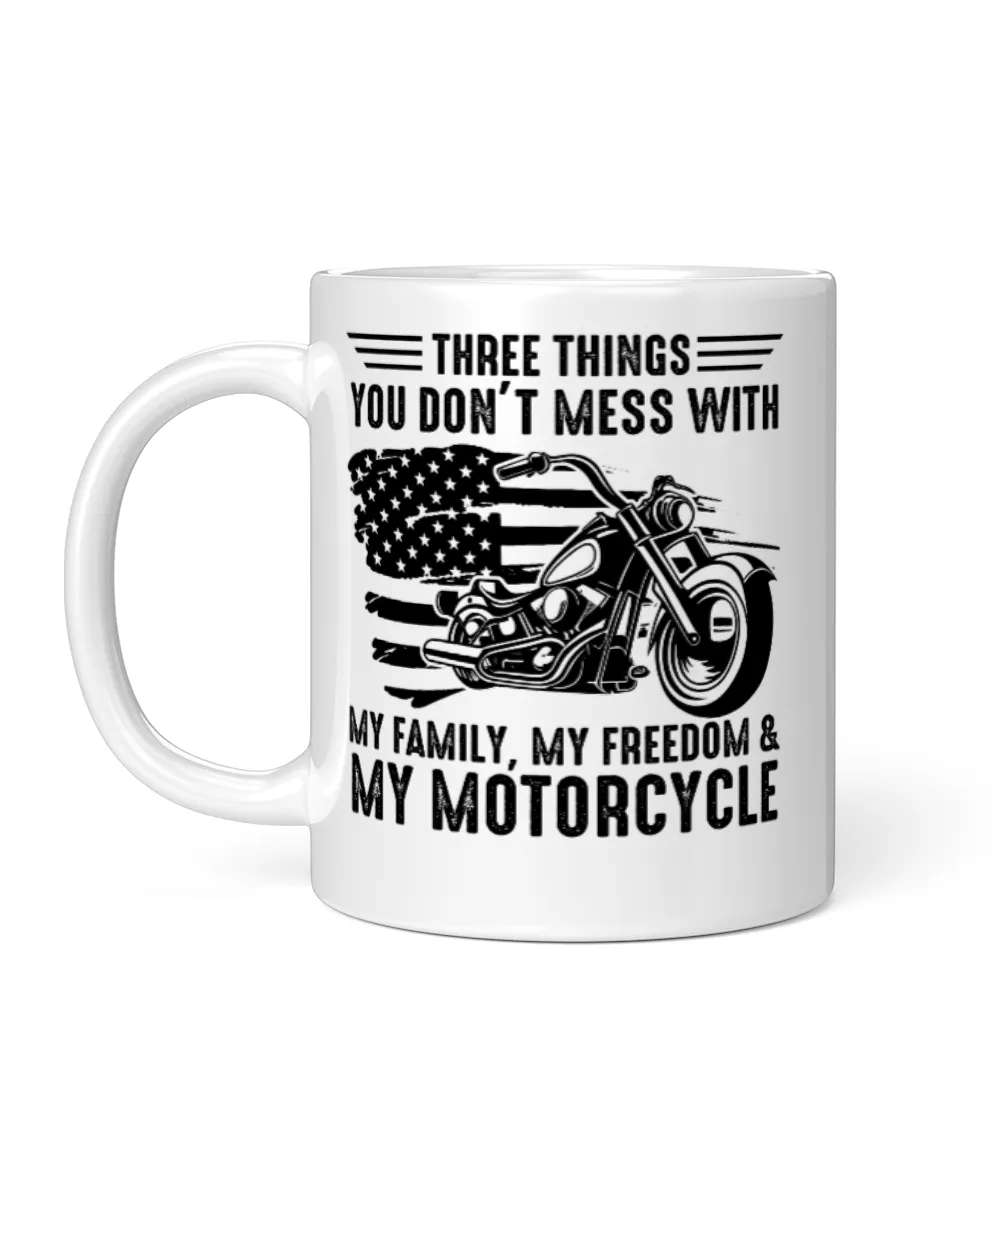 3 things you dont mess with family freedom motorcycle2